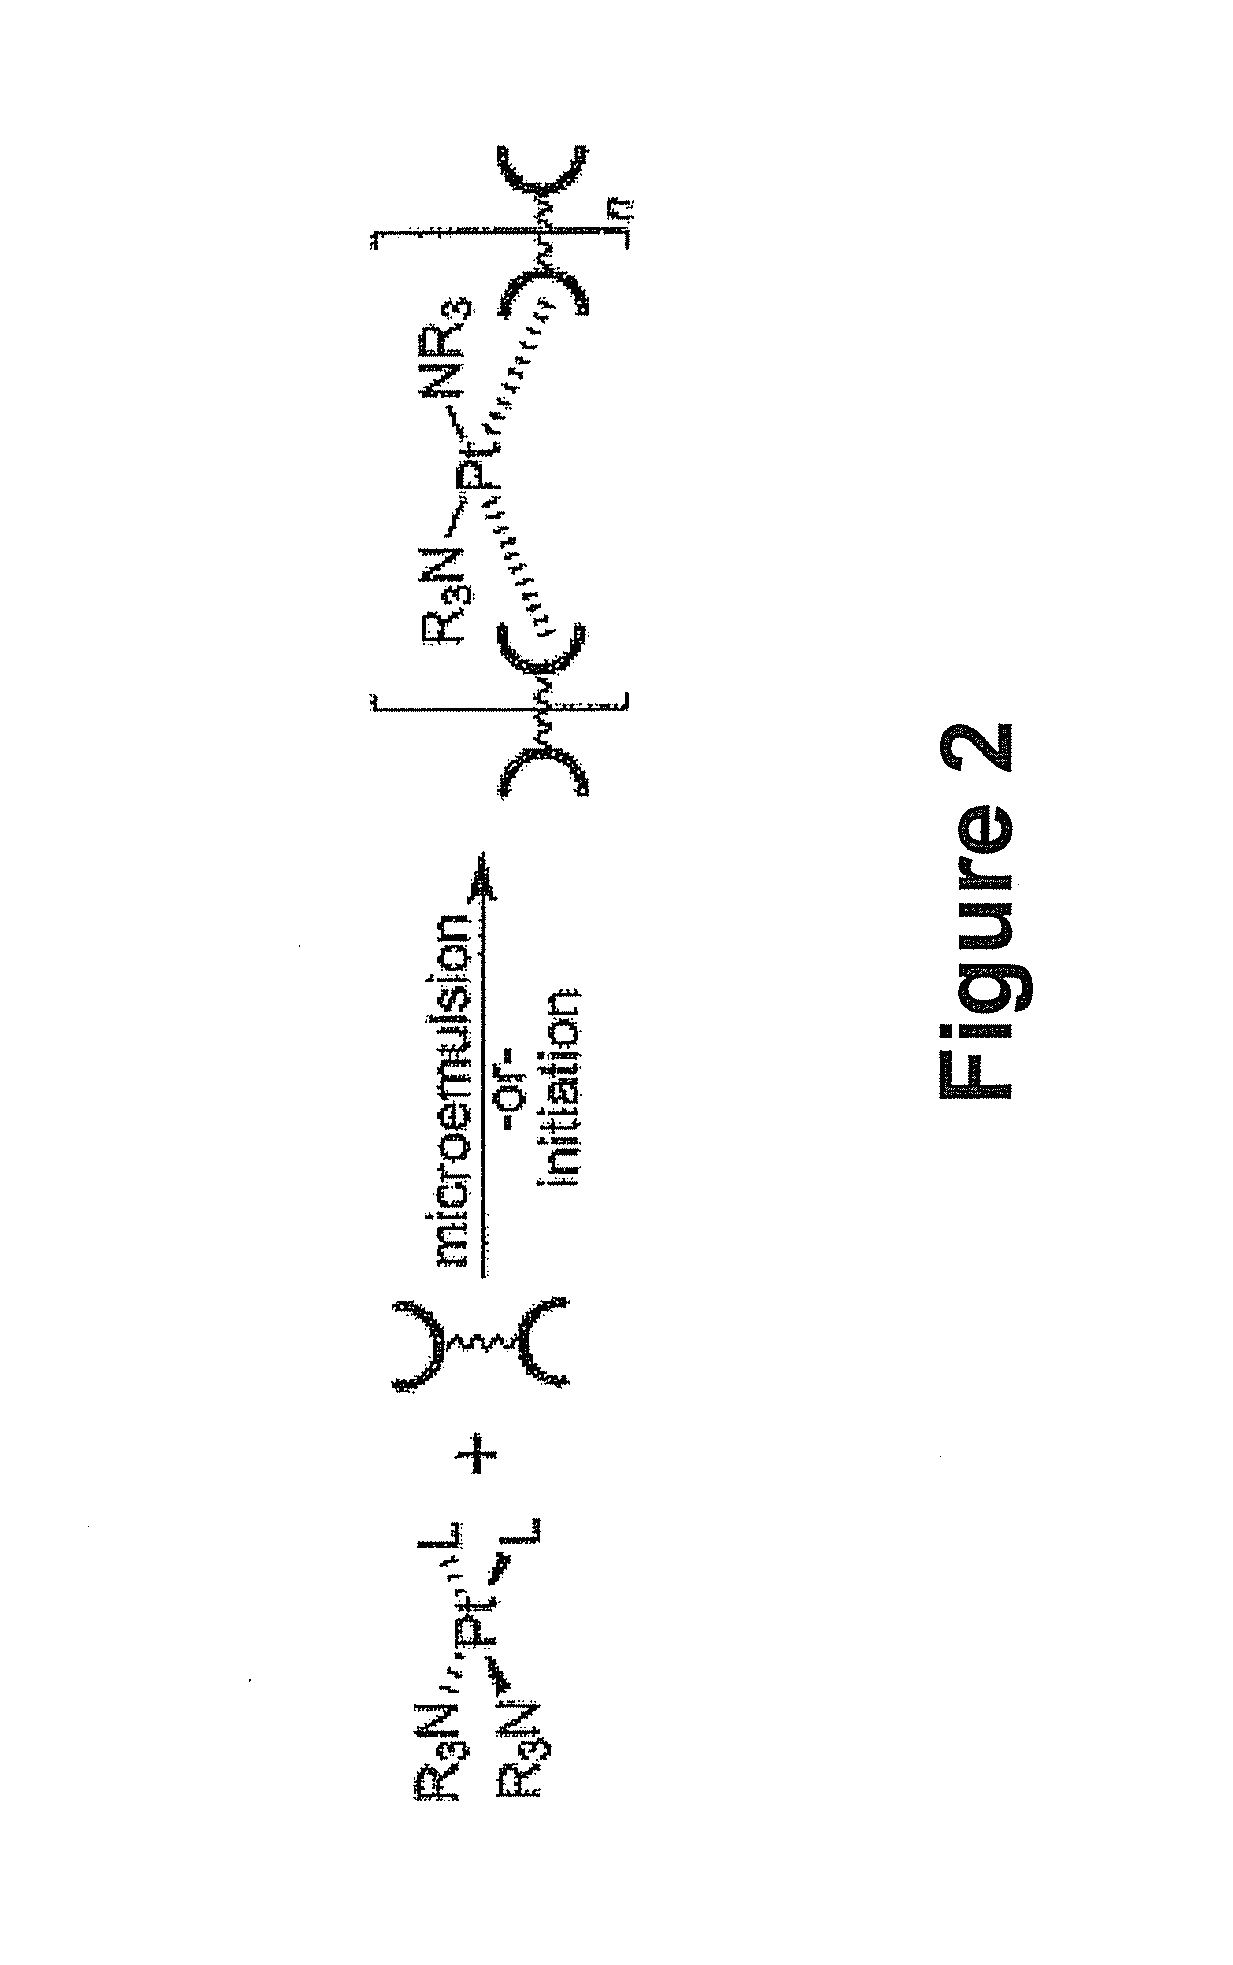 Hybrid nanoparticles as Anti-cancer therapeutic agents and dual therapeutic/imaging contrast agents